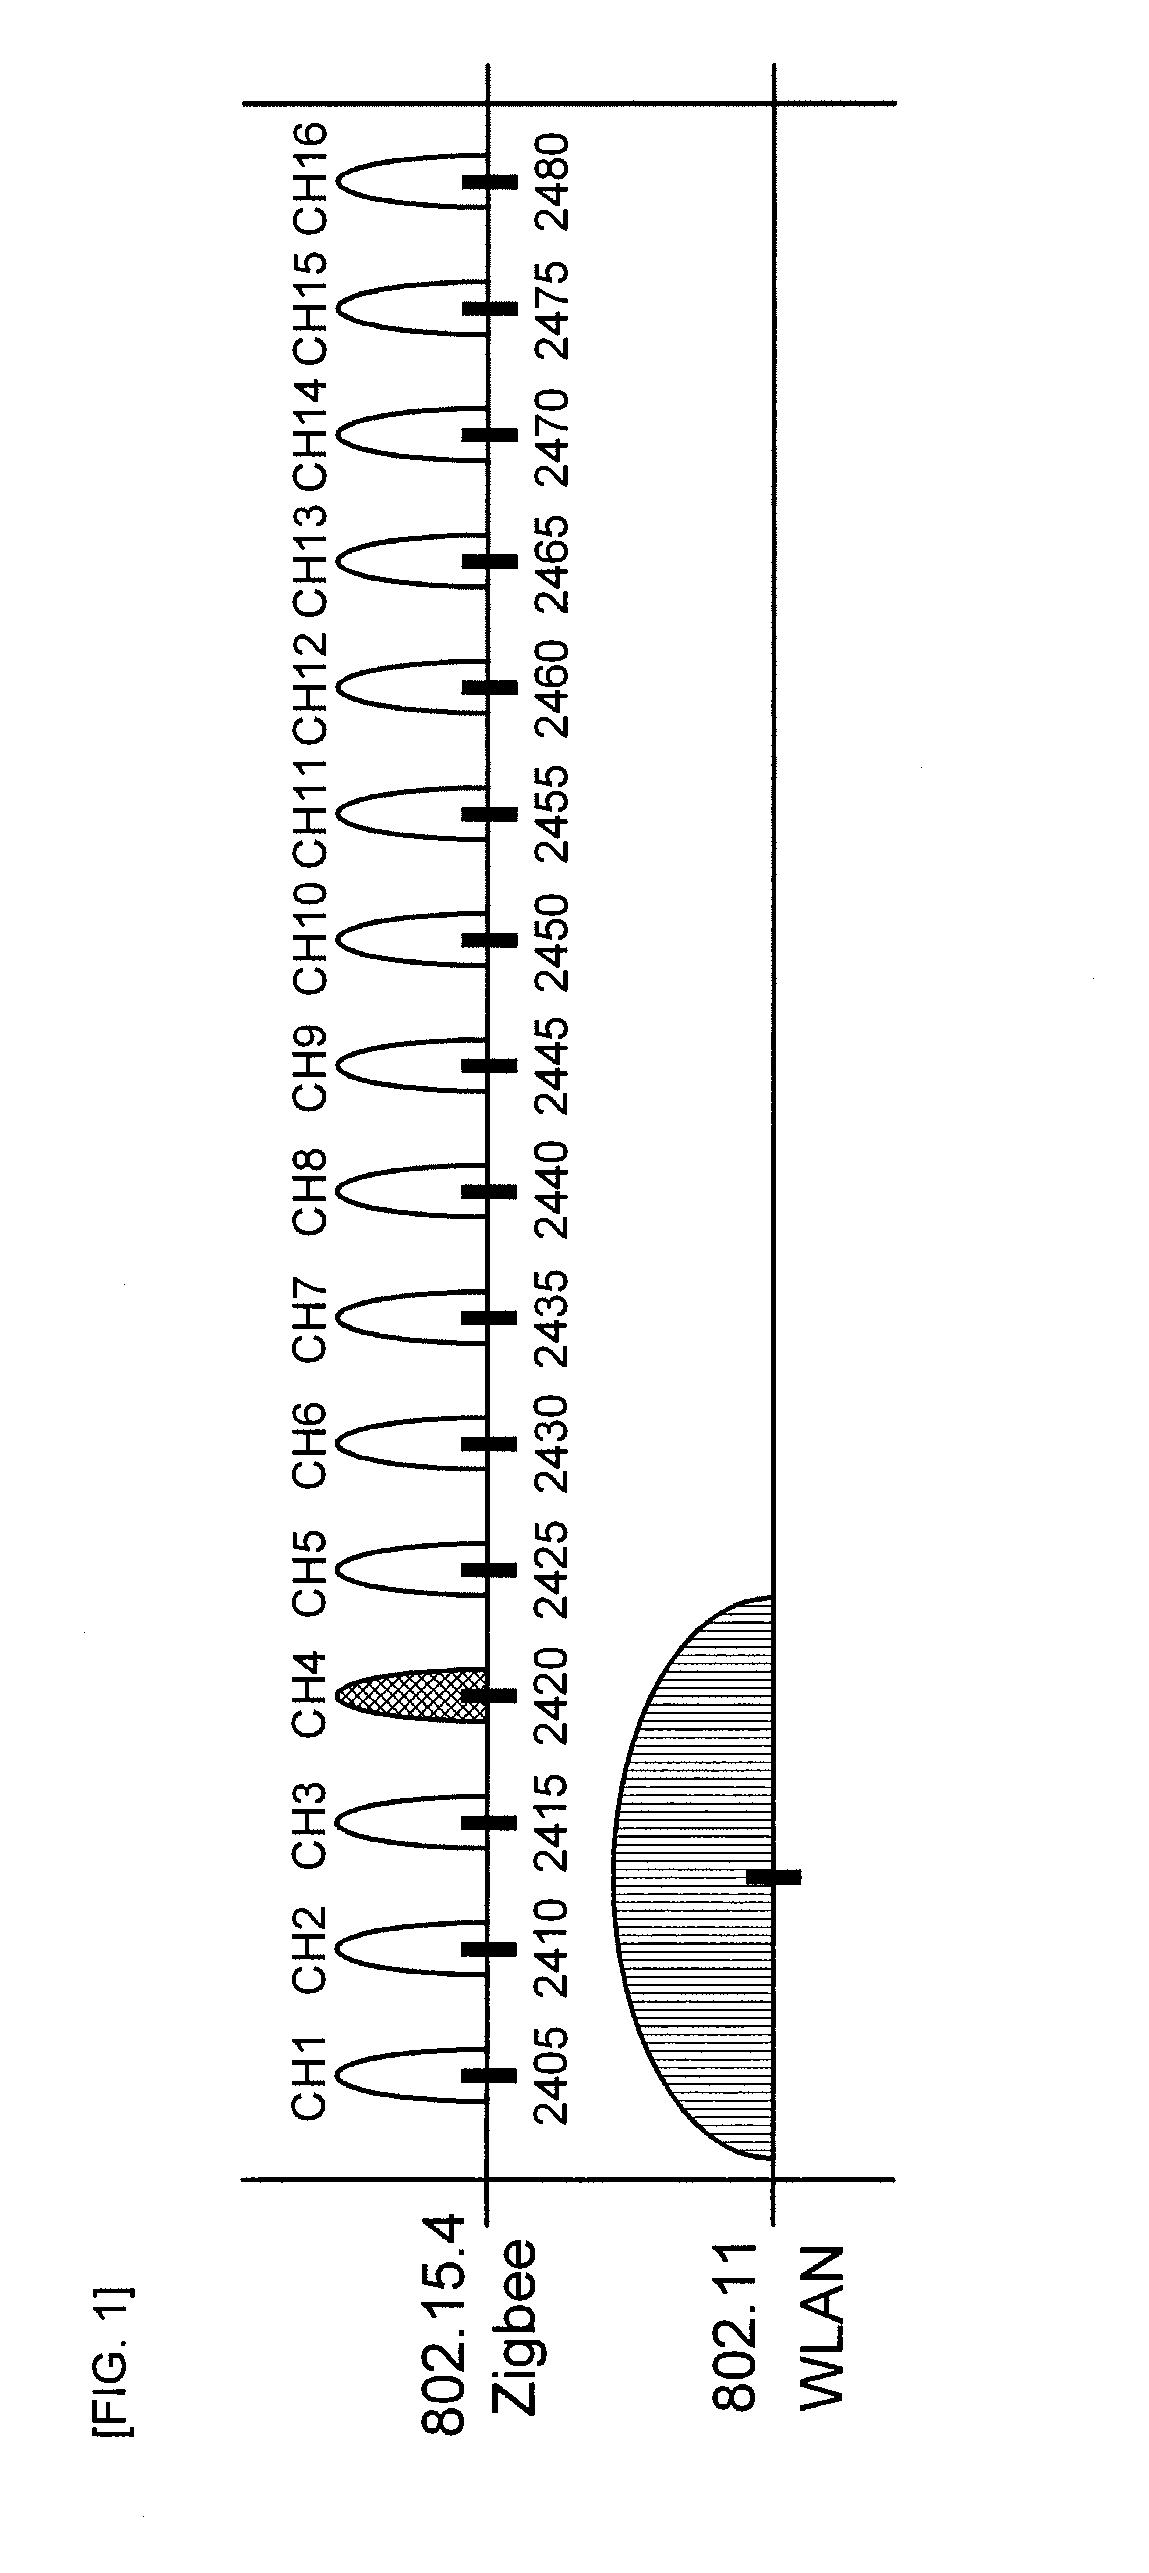 Method of getting energy level of communication channel